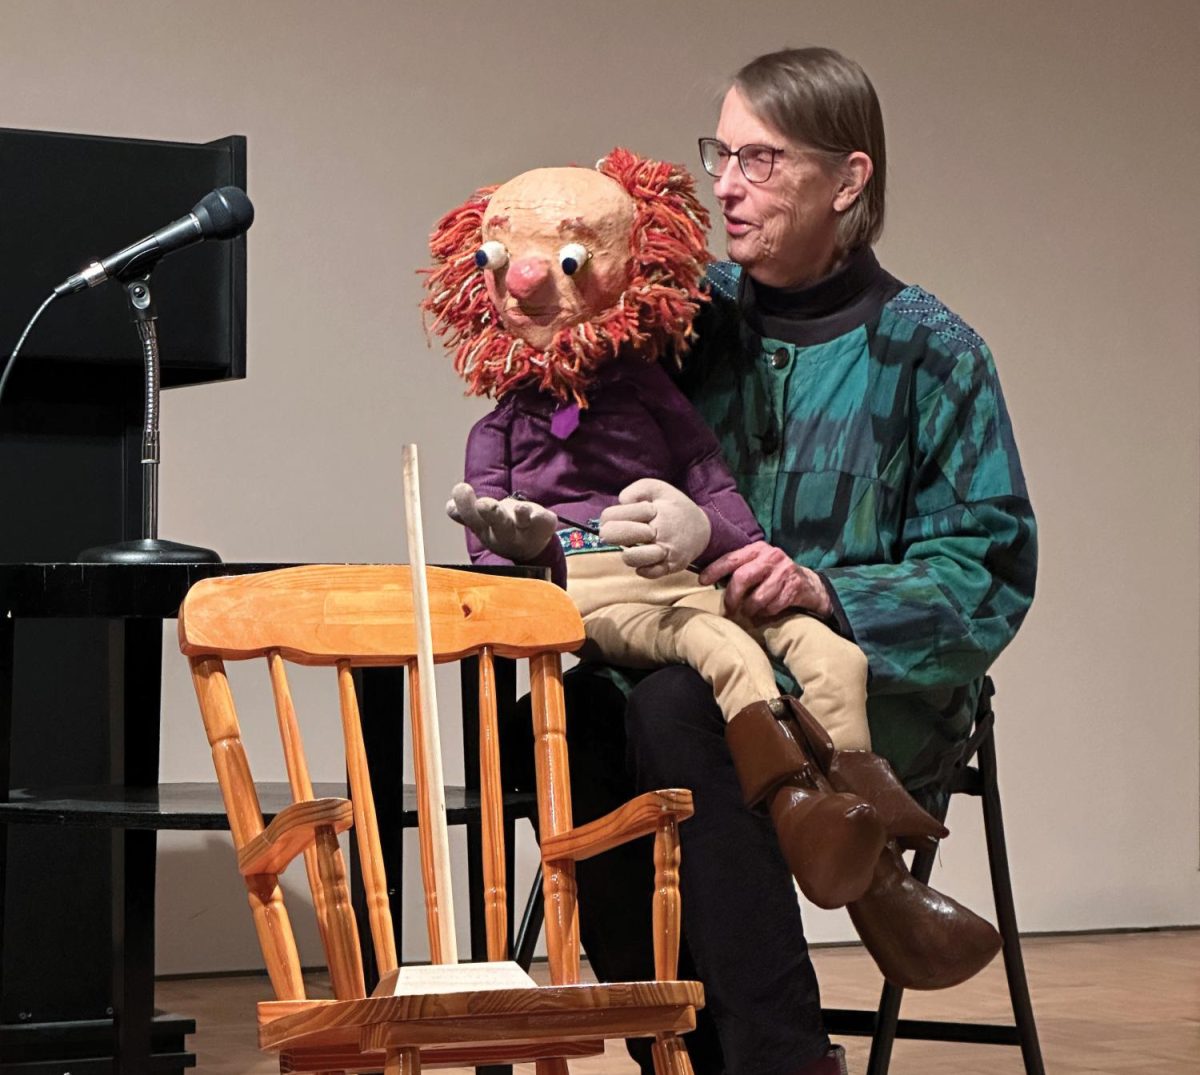 Monica+Leo+has+toured+the+country+teaching+the+craft+of+puppet+building+and+performing.+She+is+the+founder+of%0AEulenspiegel+Puppet+Theatre+in+West+Liberty%2C+Iowa%2C+and+she+brought+her+puppet+Alfred+Schulz+to+perform+for+the%0Aaudience+in+the+Hearst+Center.